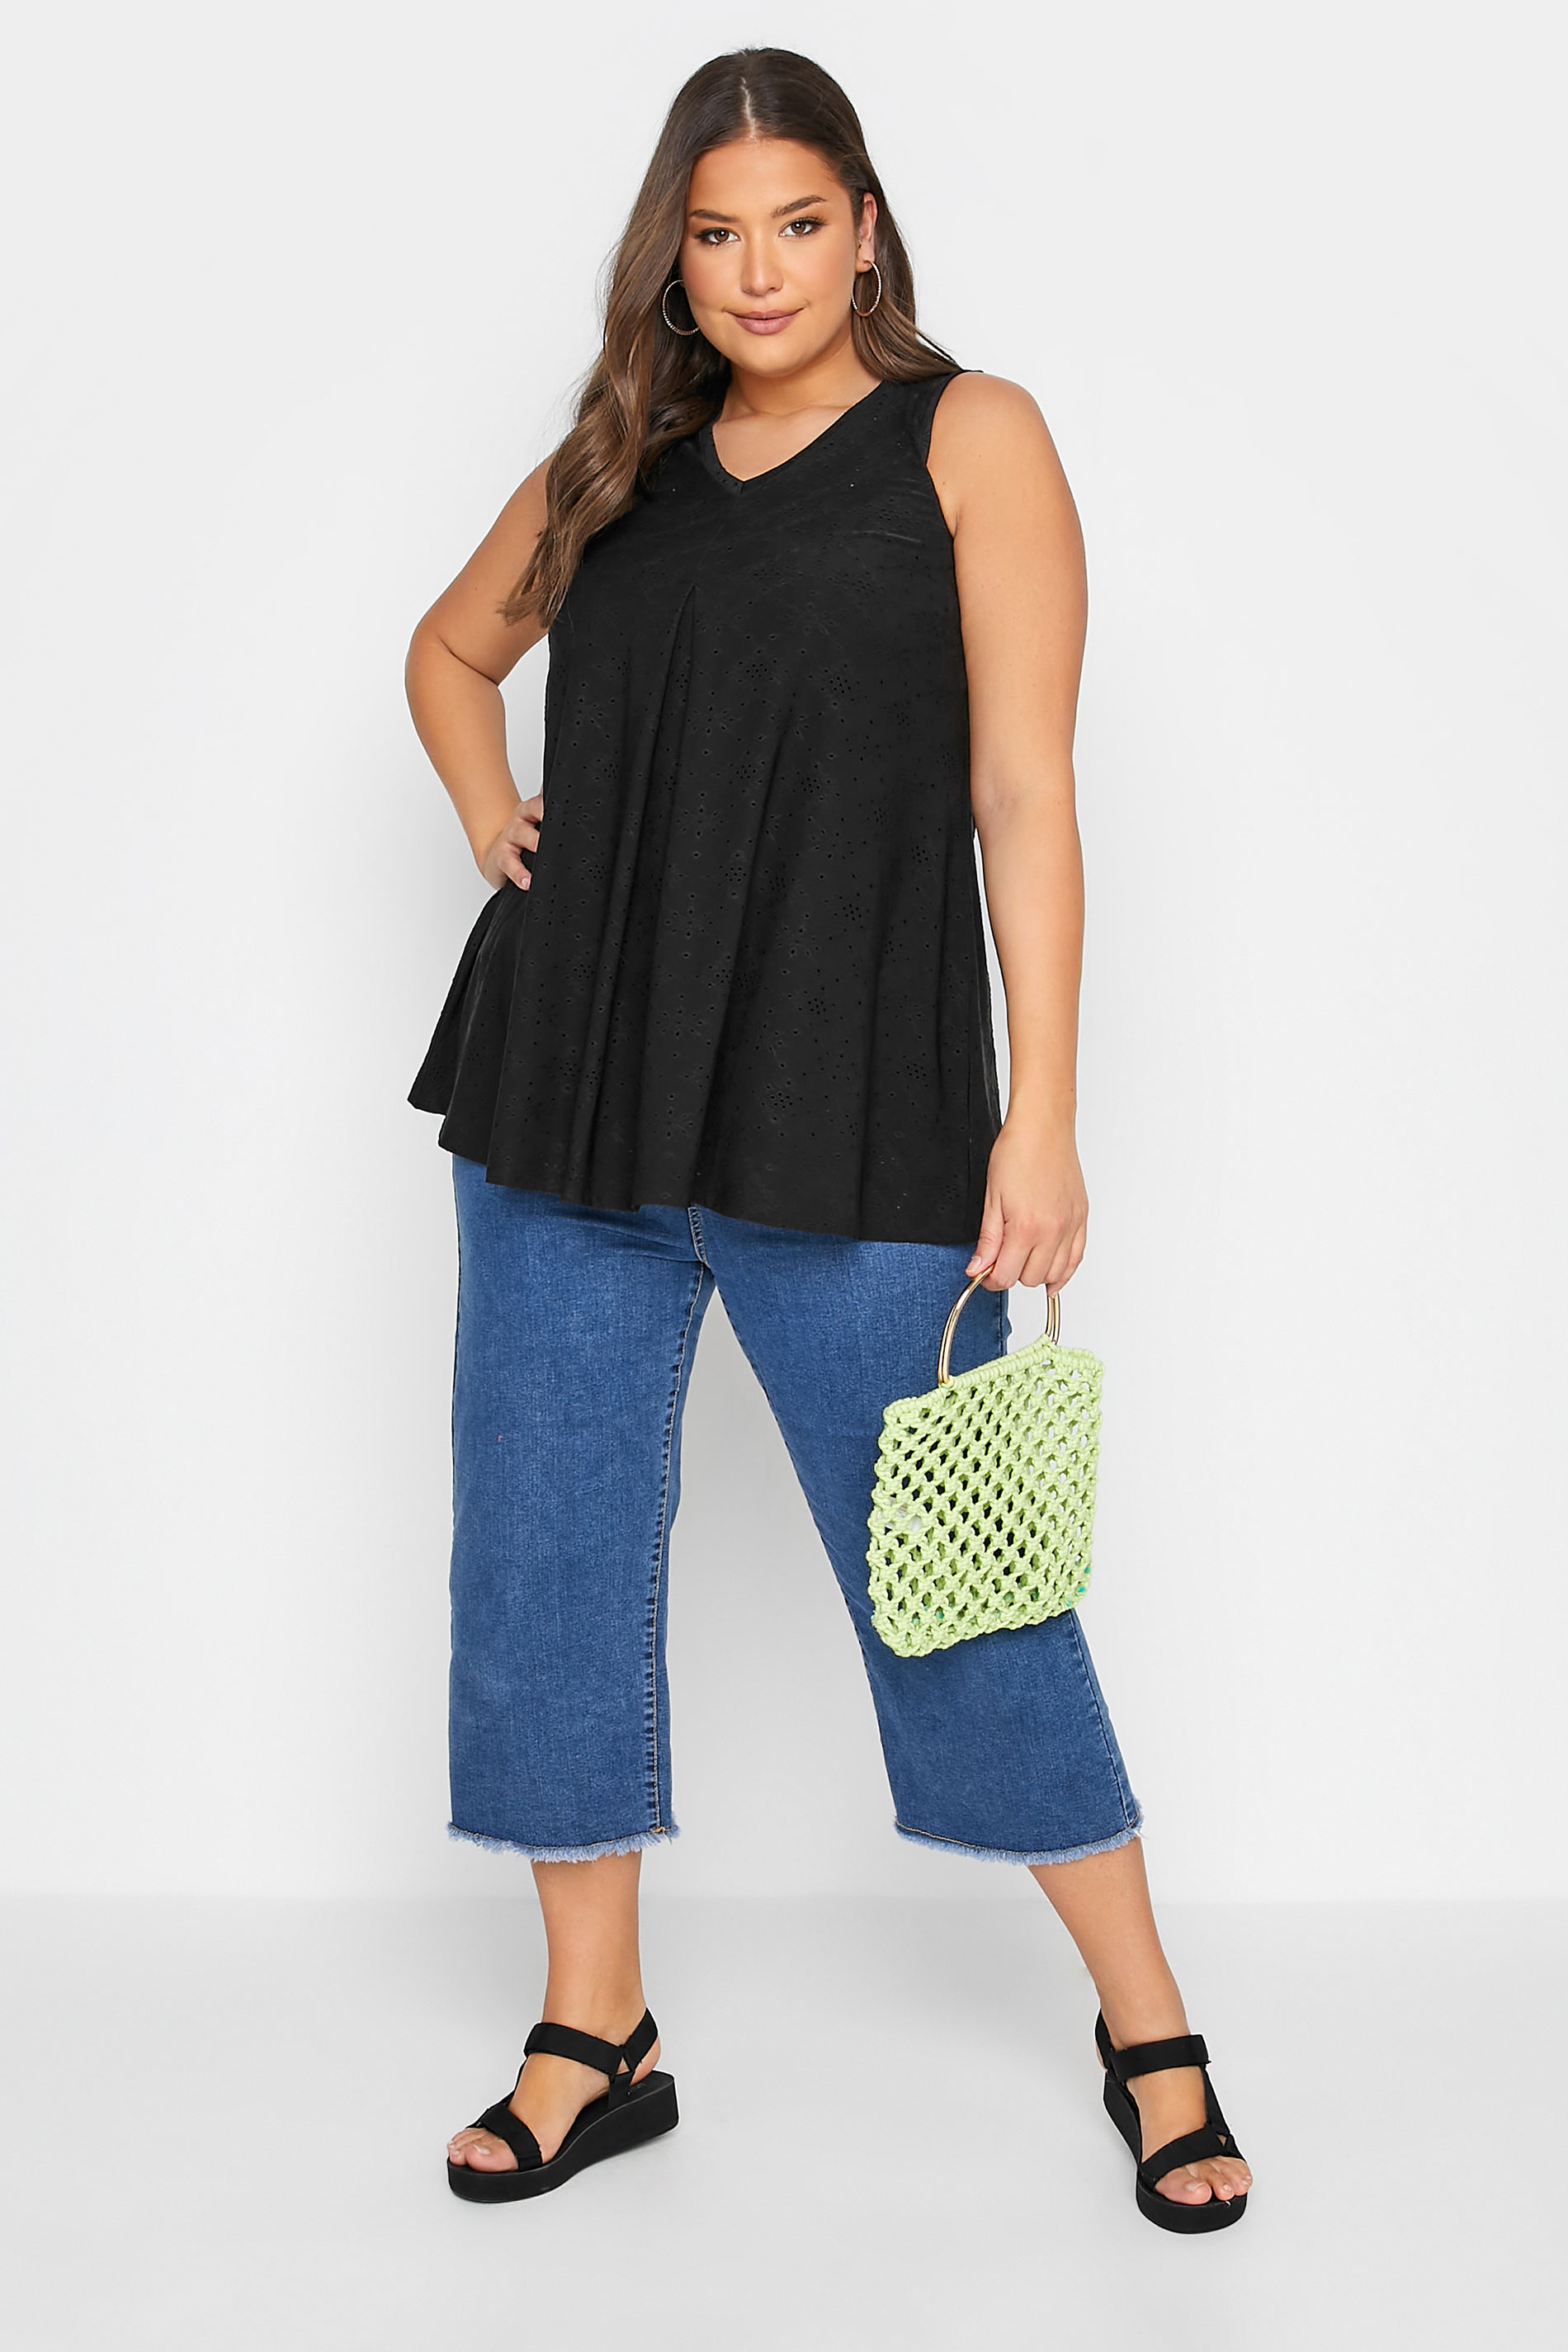 Grande taille  Tops Grande taille  Tops Jersey | Top Volanté Noir Broderie Anglaise - VJ60208